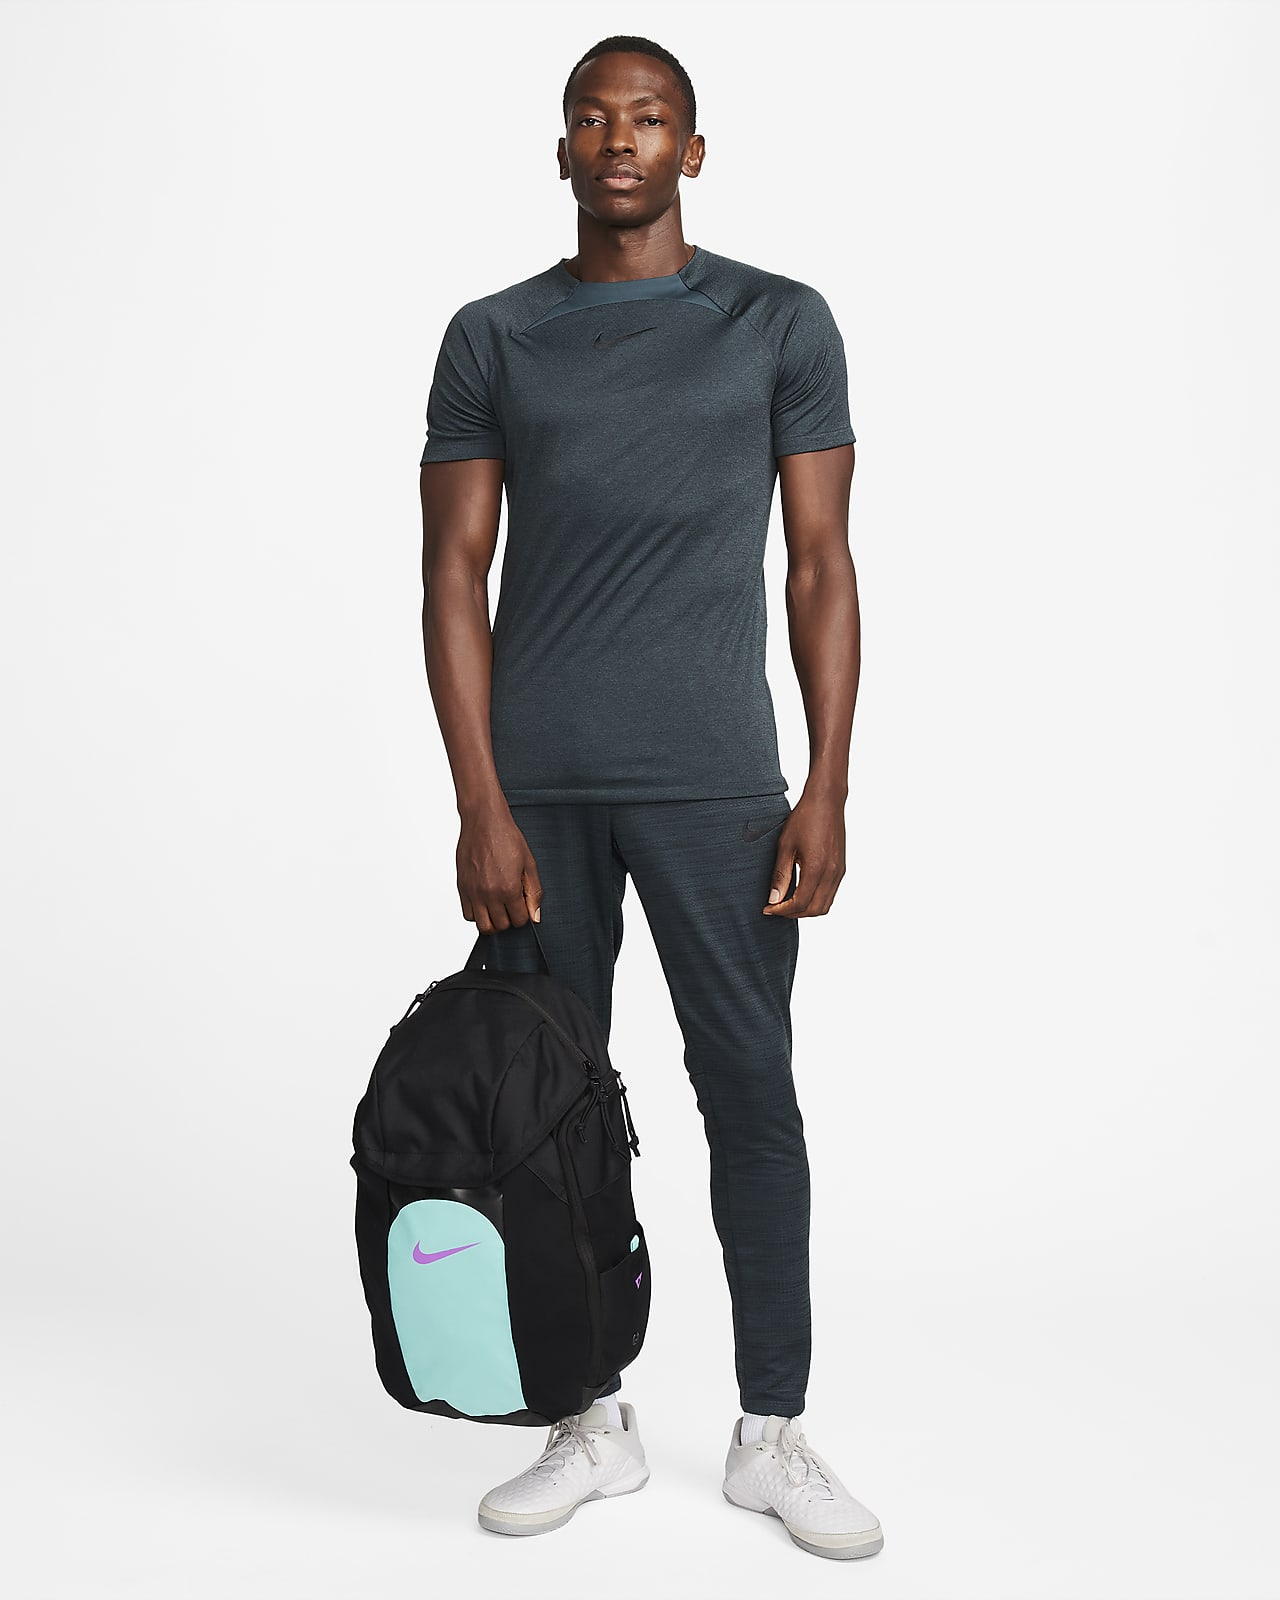 Gray+Nike+Backpack+School+and+Sports+Bag+for+Team+Travel+DC2647